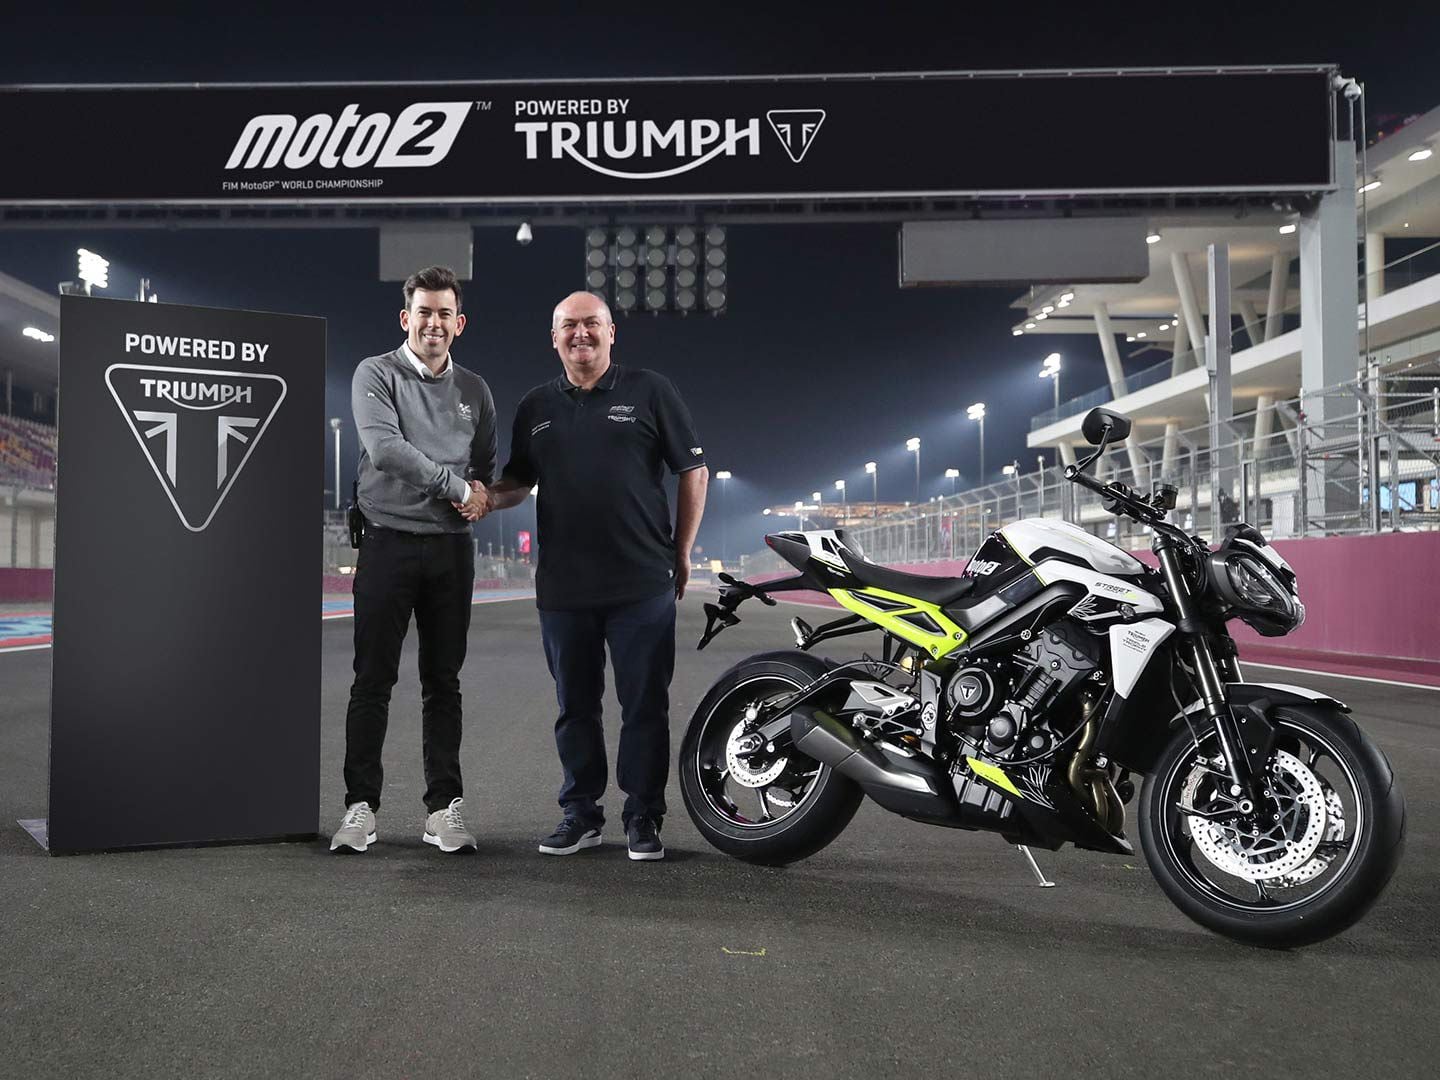 2024 Triumph Triple Trophy Competition Launches in Moto2